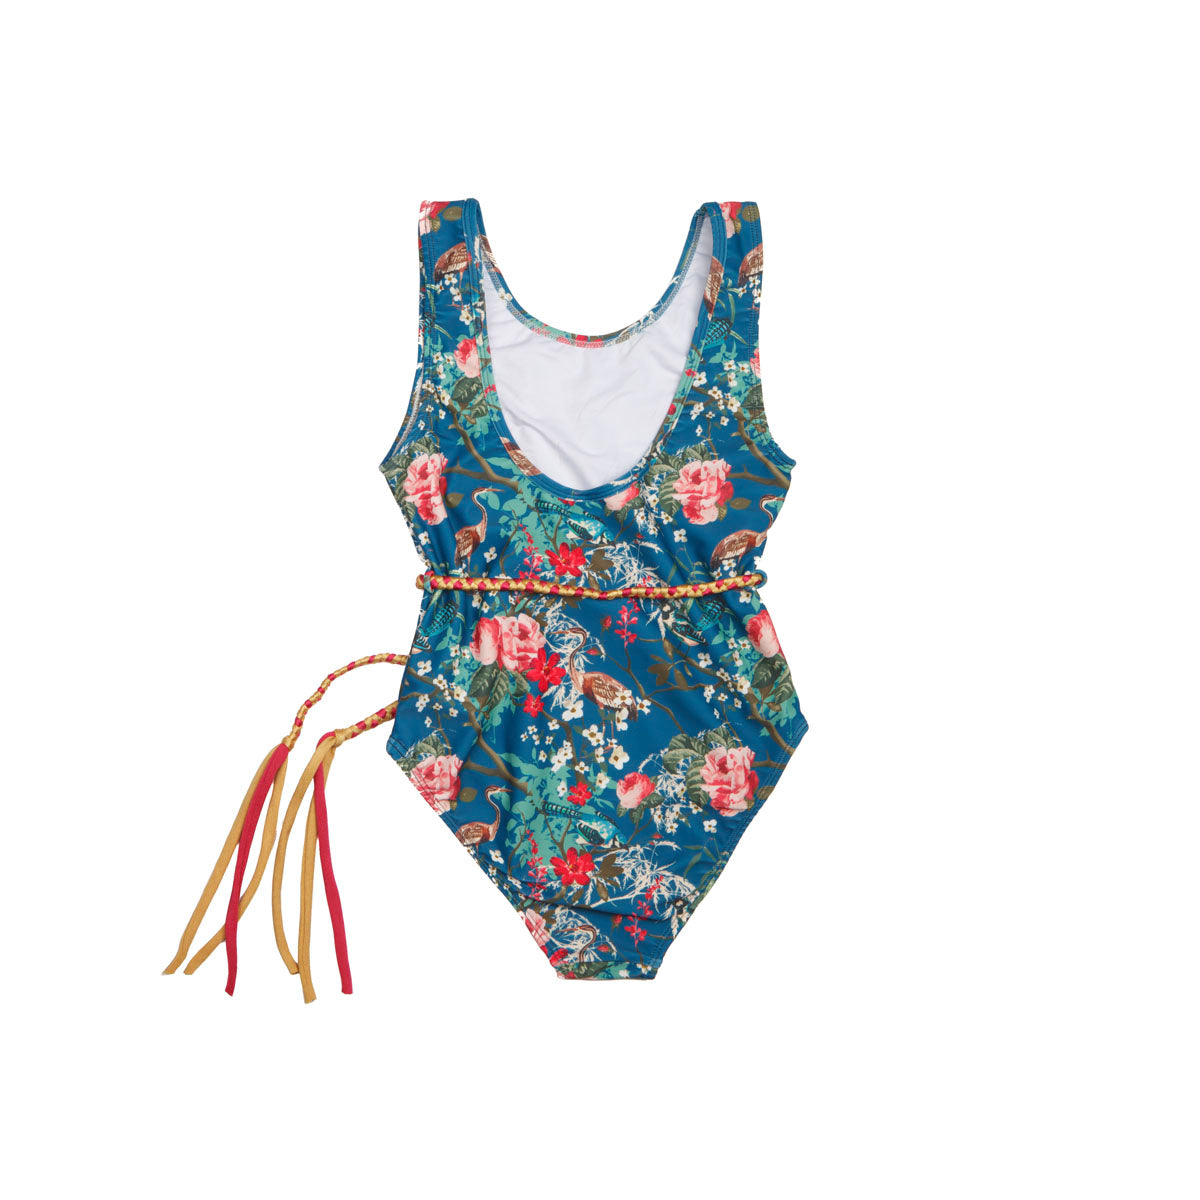 Girls Navy Floral One Piece Swimsuit with Tie - Back